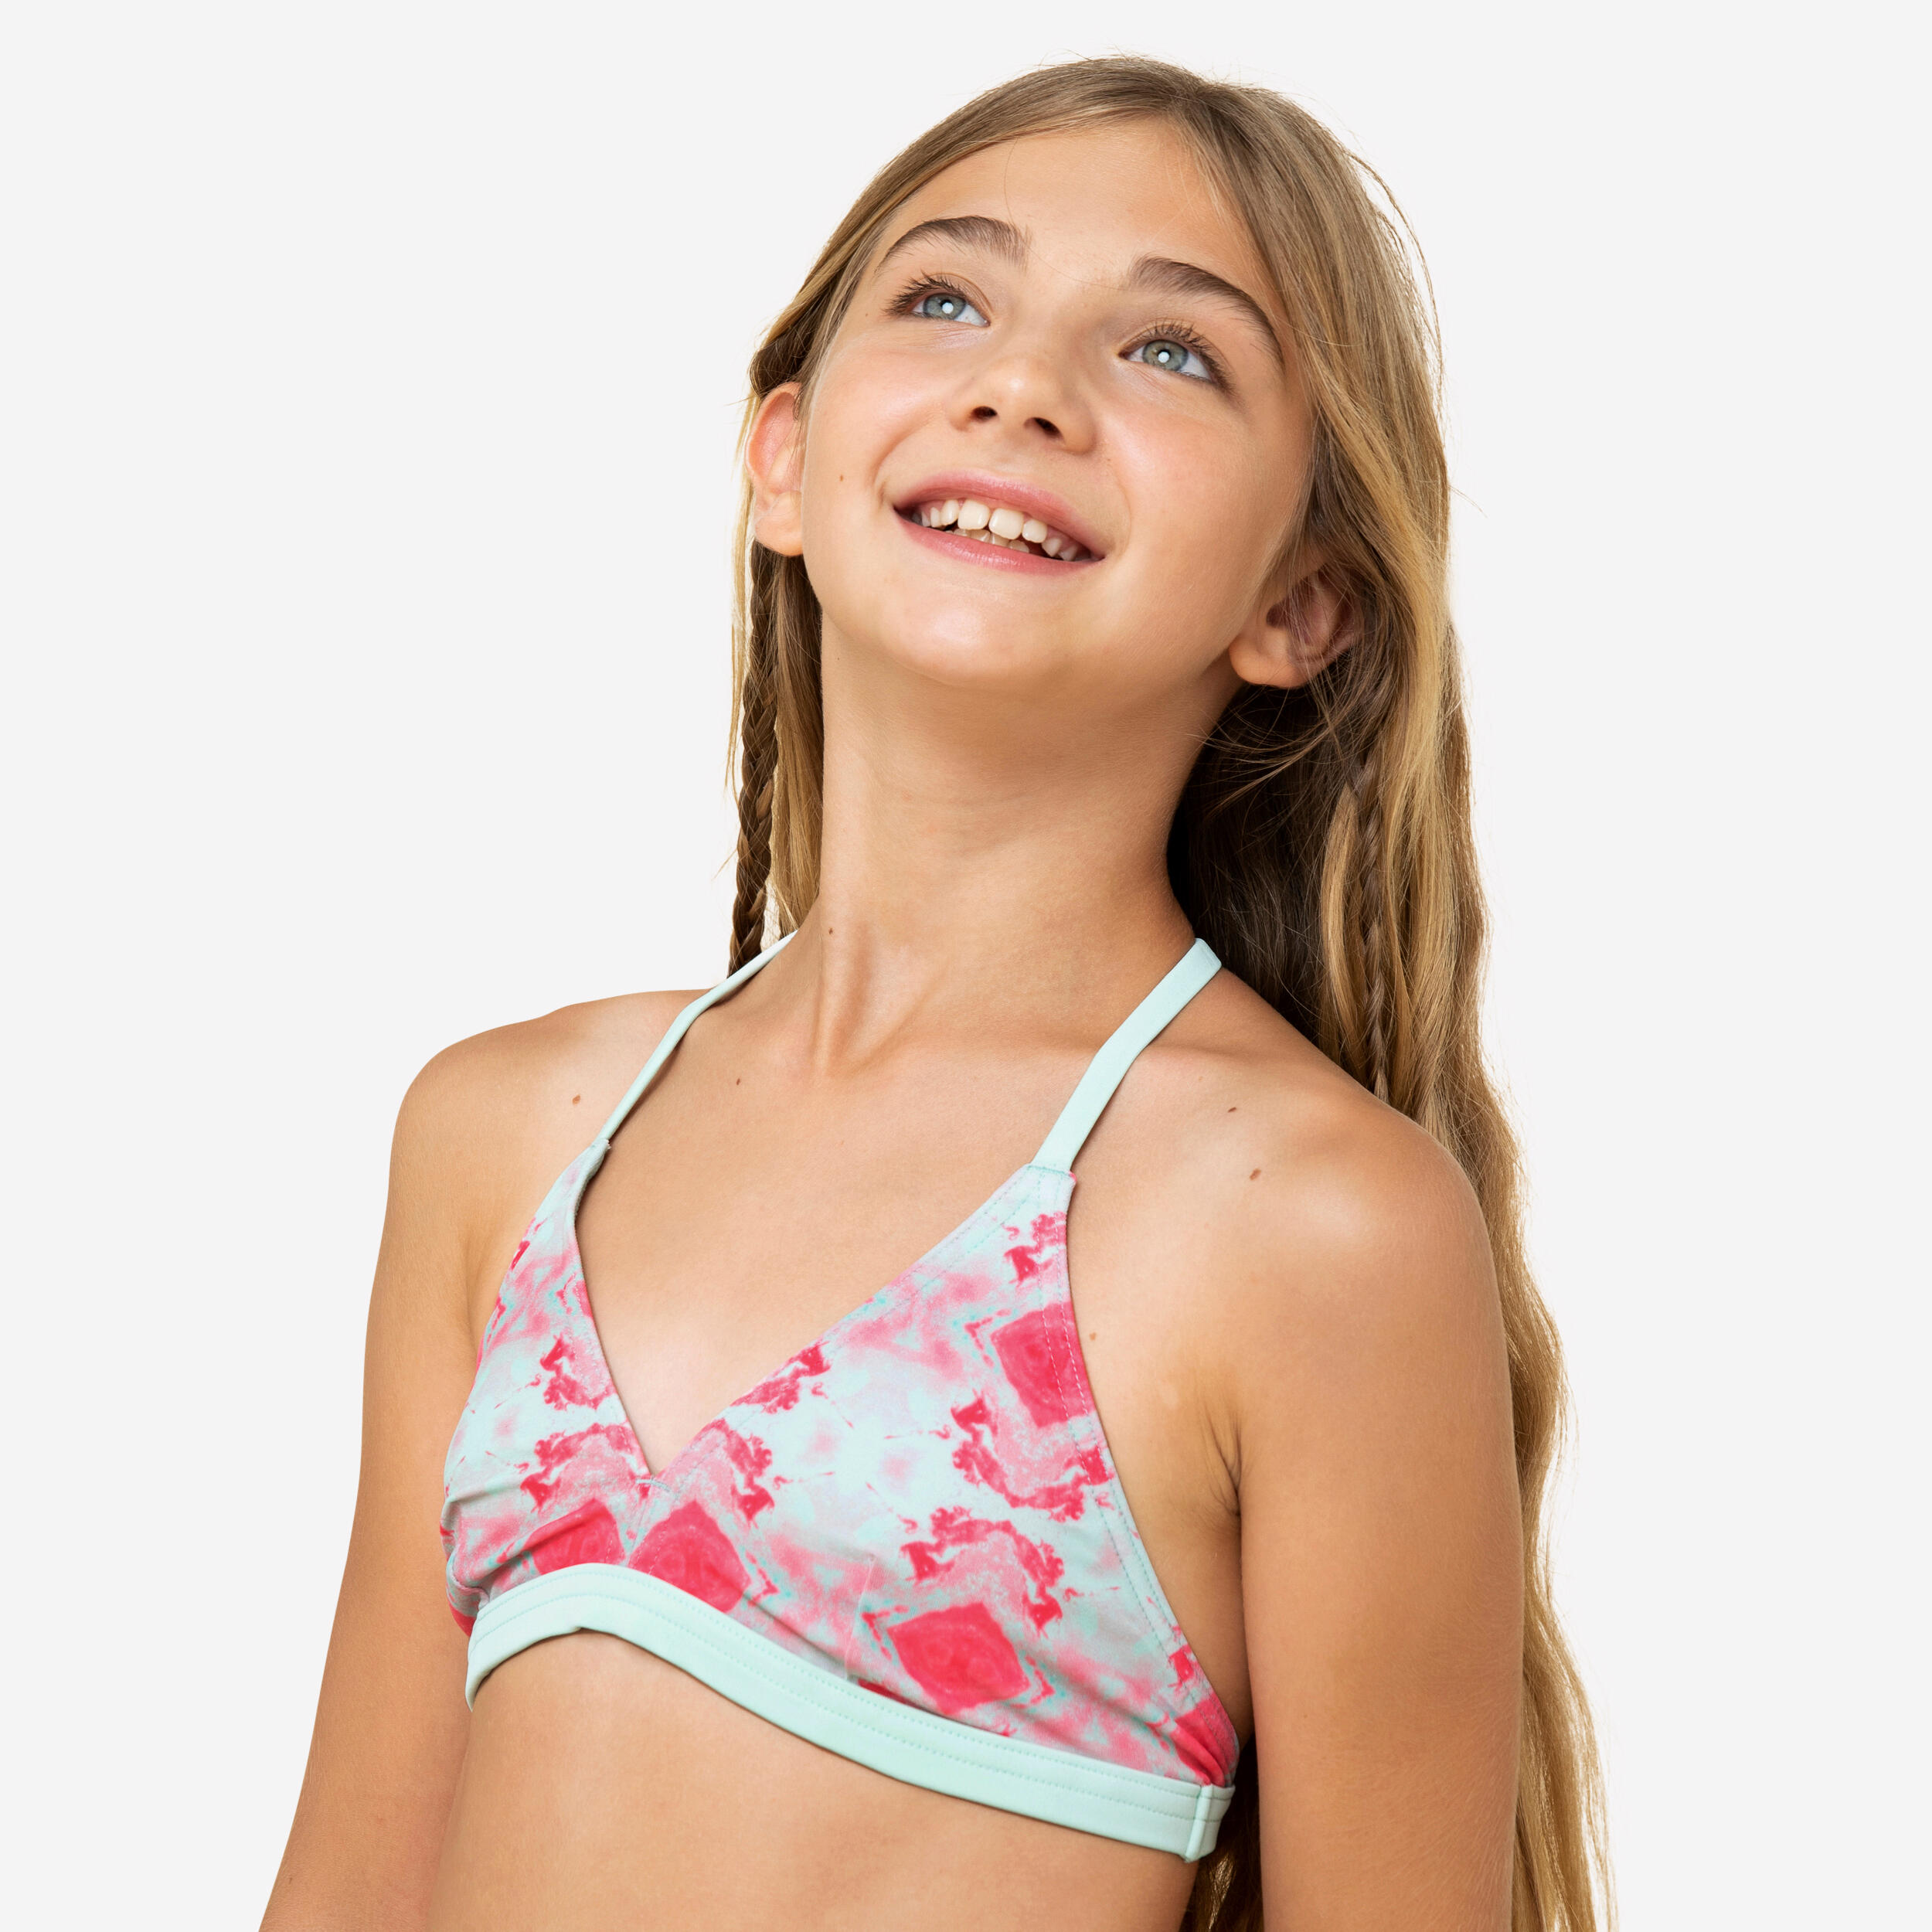 OLAIAN GIRL'S SWIMSUIT TOP SURF TRIANGLE BETTY 500 TURQUOISE PINK